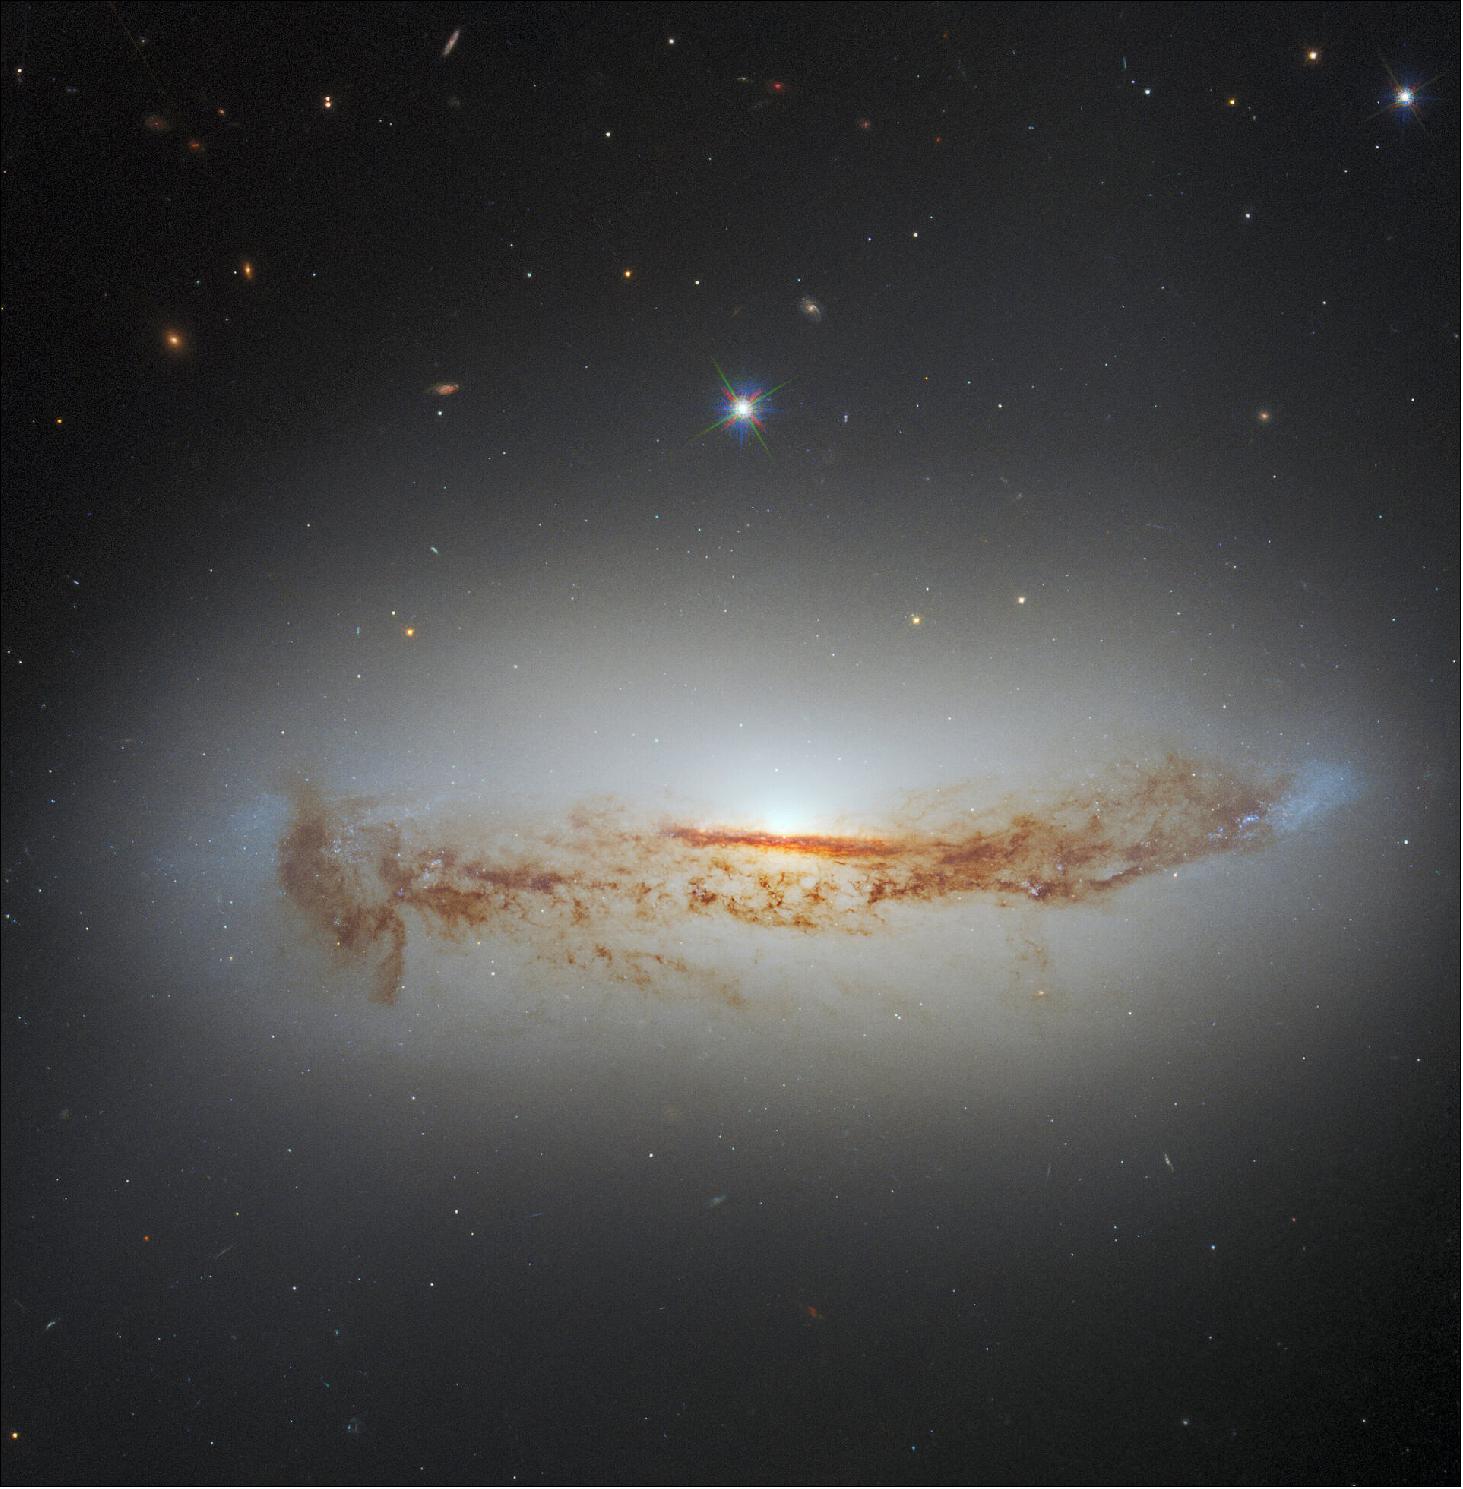 Figure 63: This image combines data from two sets of Hubble observations, both of which were proposed to study nearby active galactic nuclei. The image also combines data from two instruments — Hubble’s Advanced Camera for Surveys (ACS) and Wide Field Camera 3 (WFCS), [image credit: ESA/Hubble & NASA, D. J. Rosario, A. Barth; CC BY 4.0 Acknowledgement: L. Shatz]